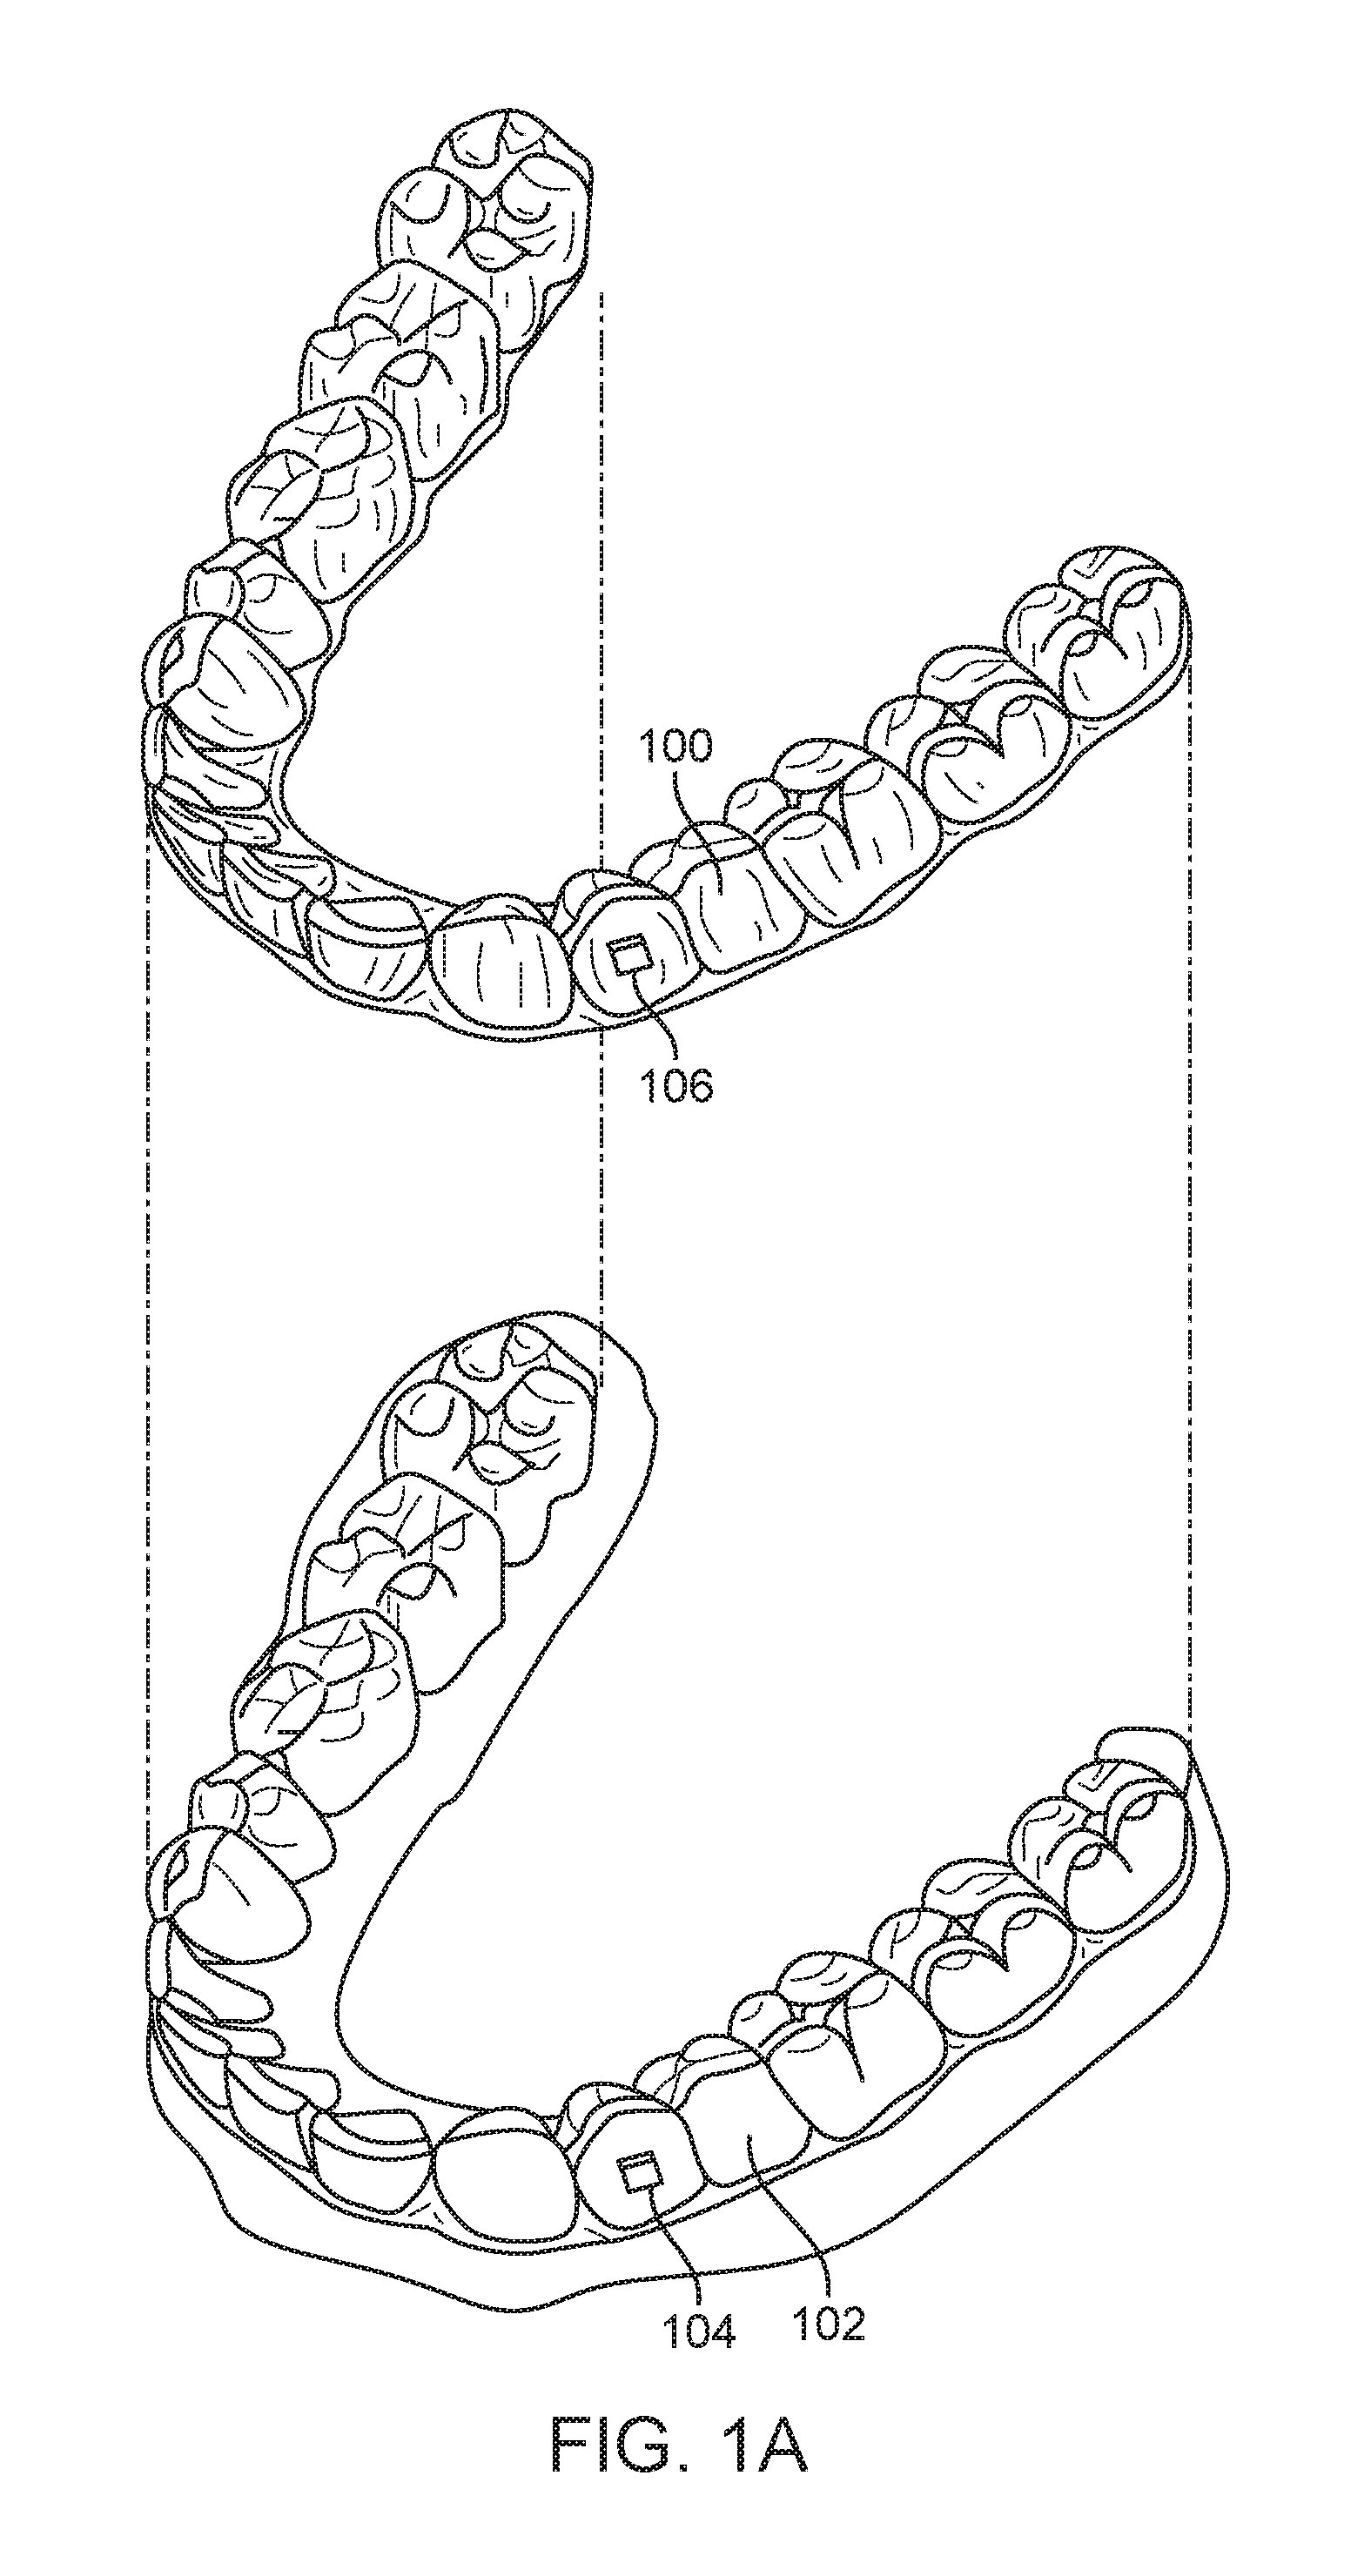 Direct fabrication of aligners with interproximal force coupling